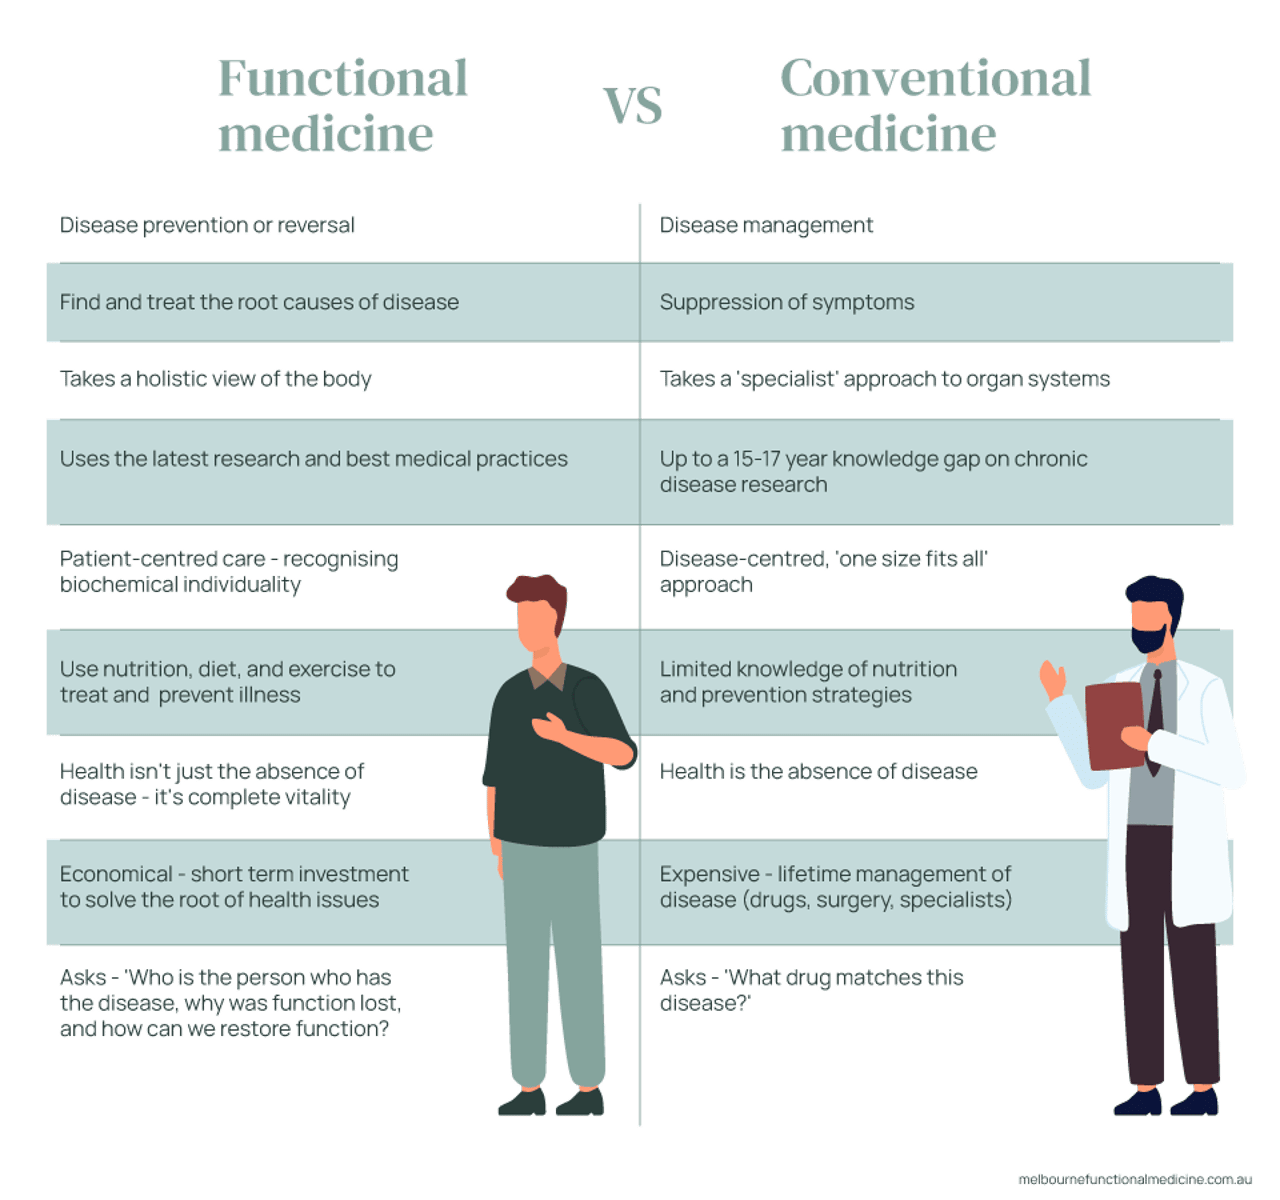 
An illustrated table comparing the differences between functional medicine and conventional medicine.